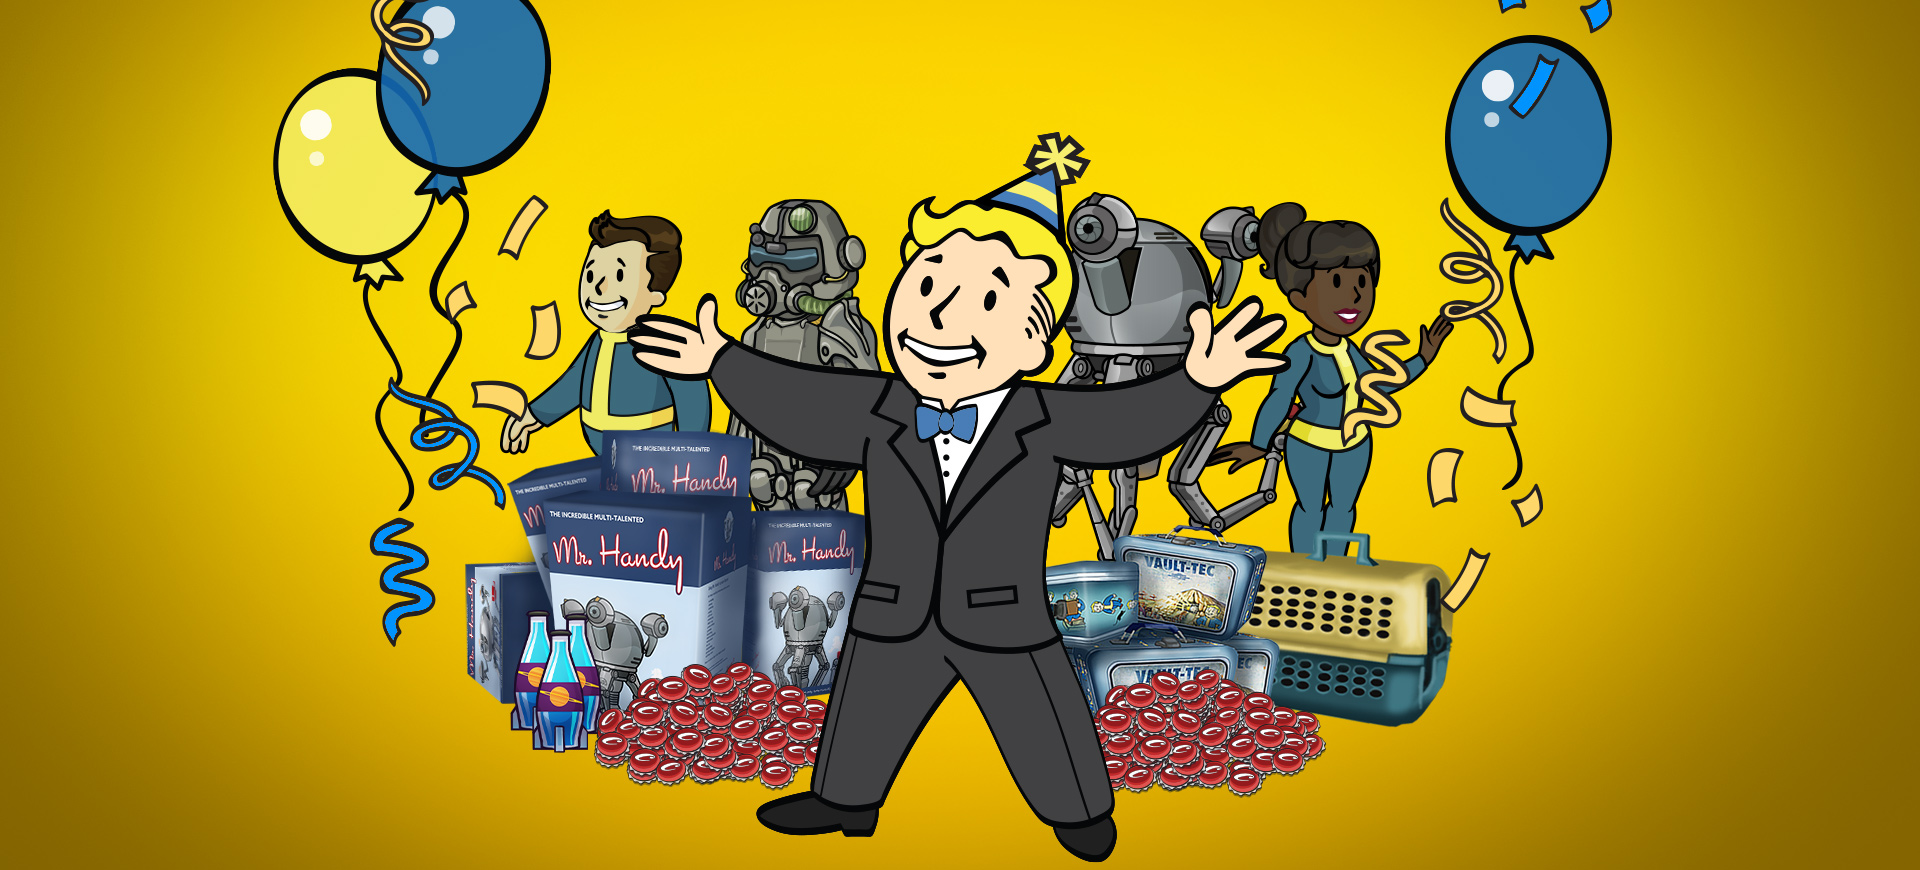 Fallout Shelter Turns 7 with Anniversary Giveaways and Sale